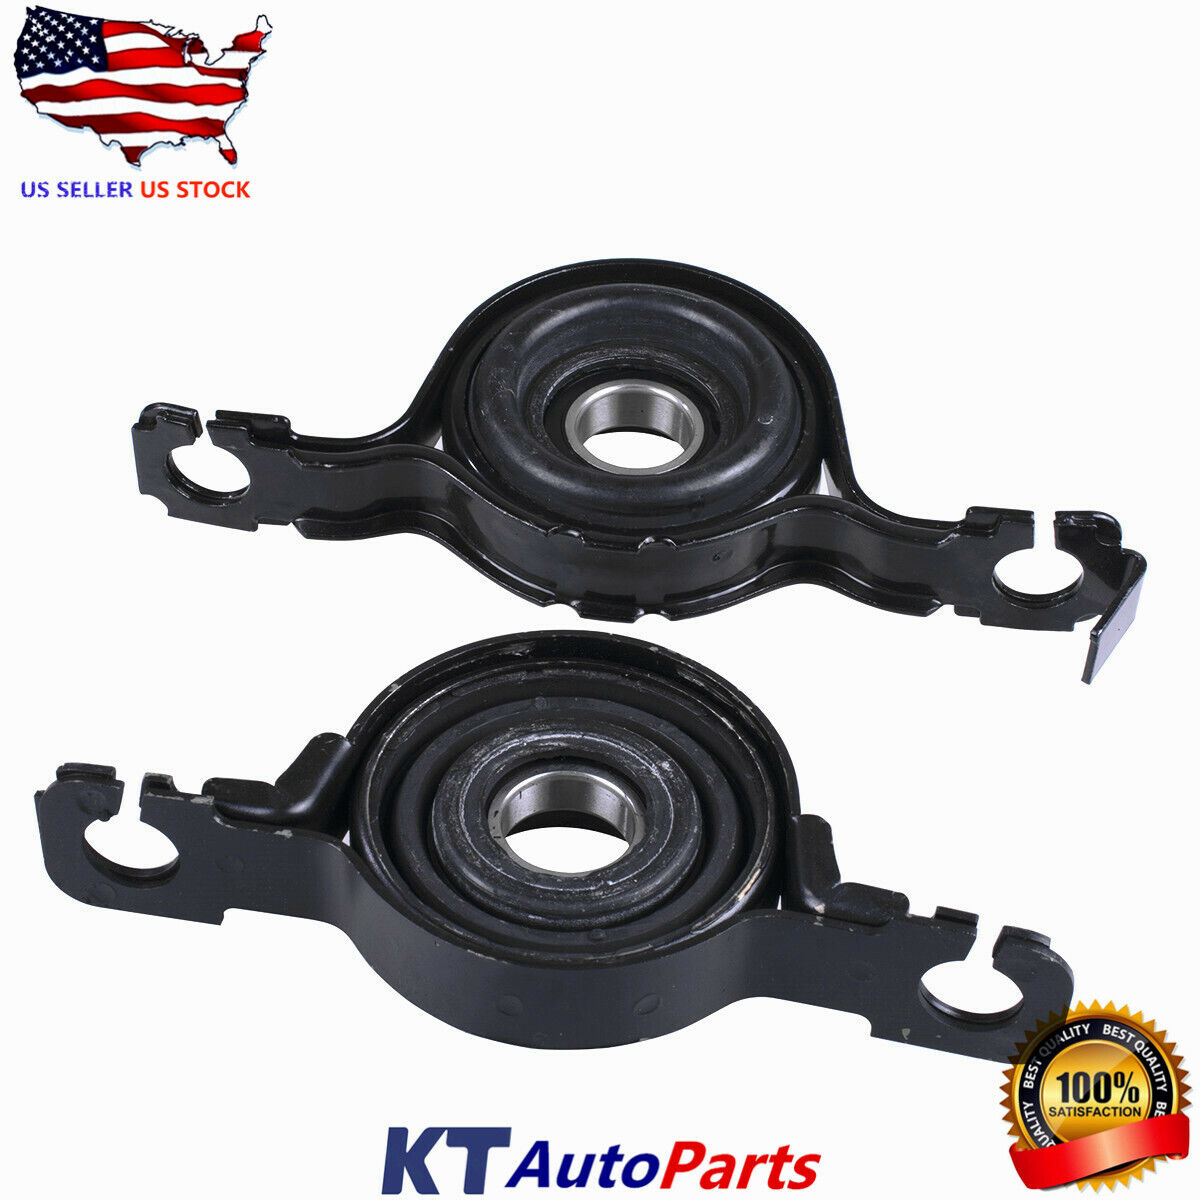 2Pcs Front + Rear Center Support Bearing Kit for Ford Edge & Mazda CX9 2007-2013